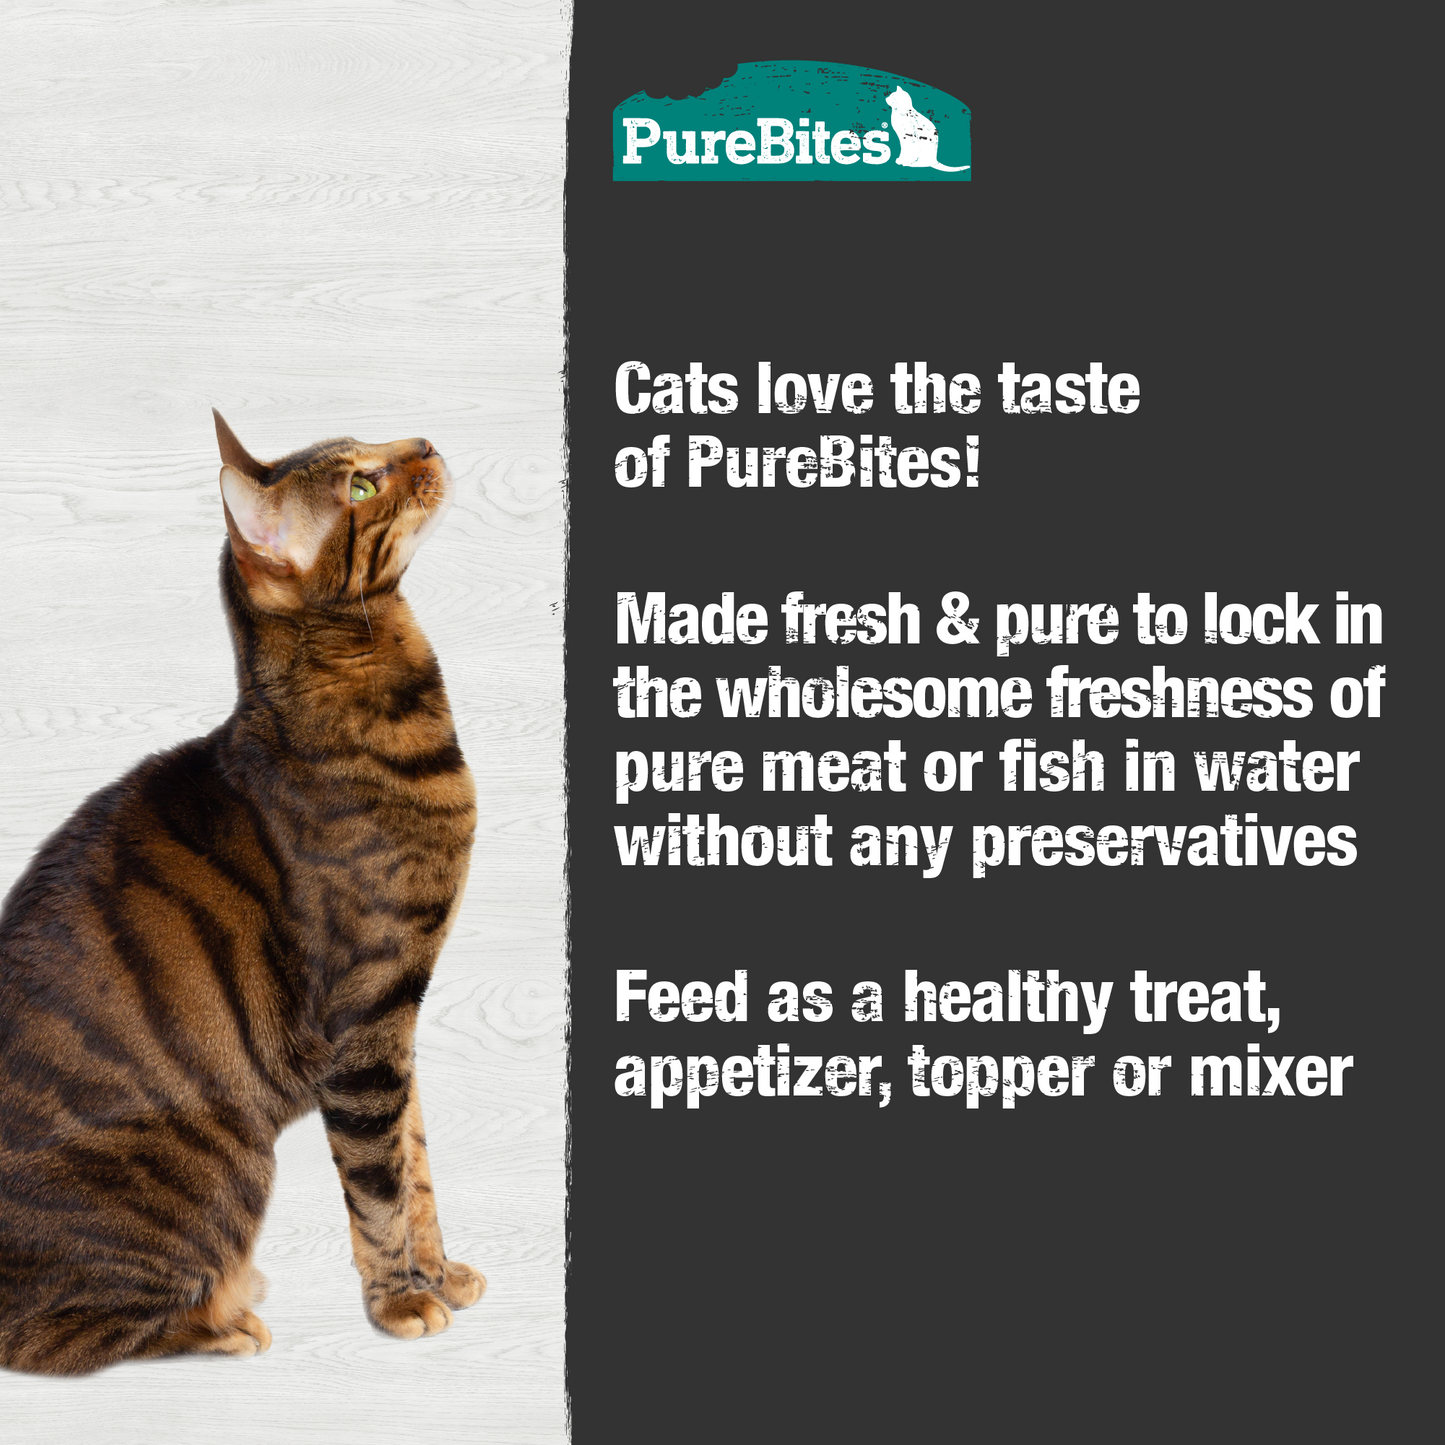 Made fresh & pure means more protein and nutrients packed into every tray. The chicken & shrimp in our wet mixers is delicately steamed to help preserve the ingredient's taste, and nutrition, and mirror a cat’s ancestral diet